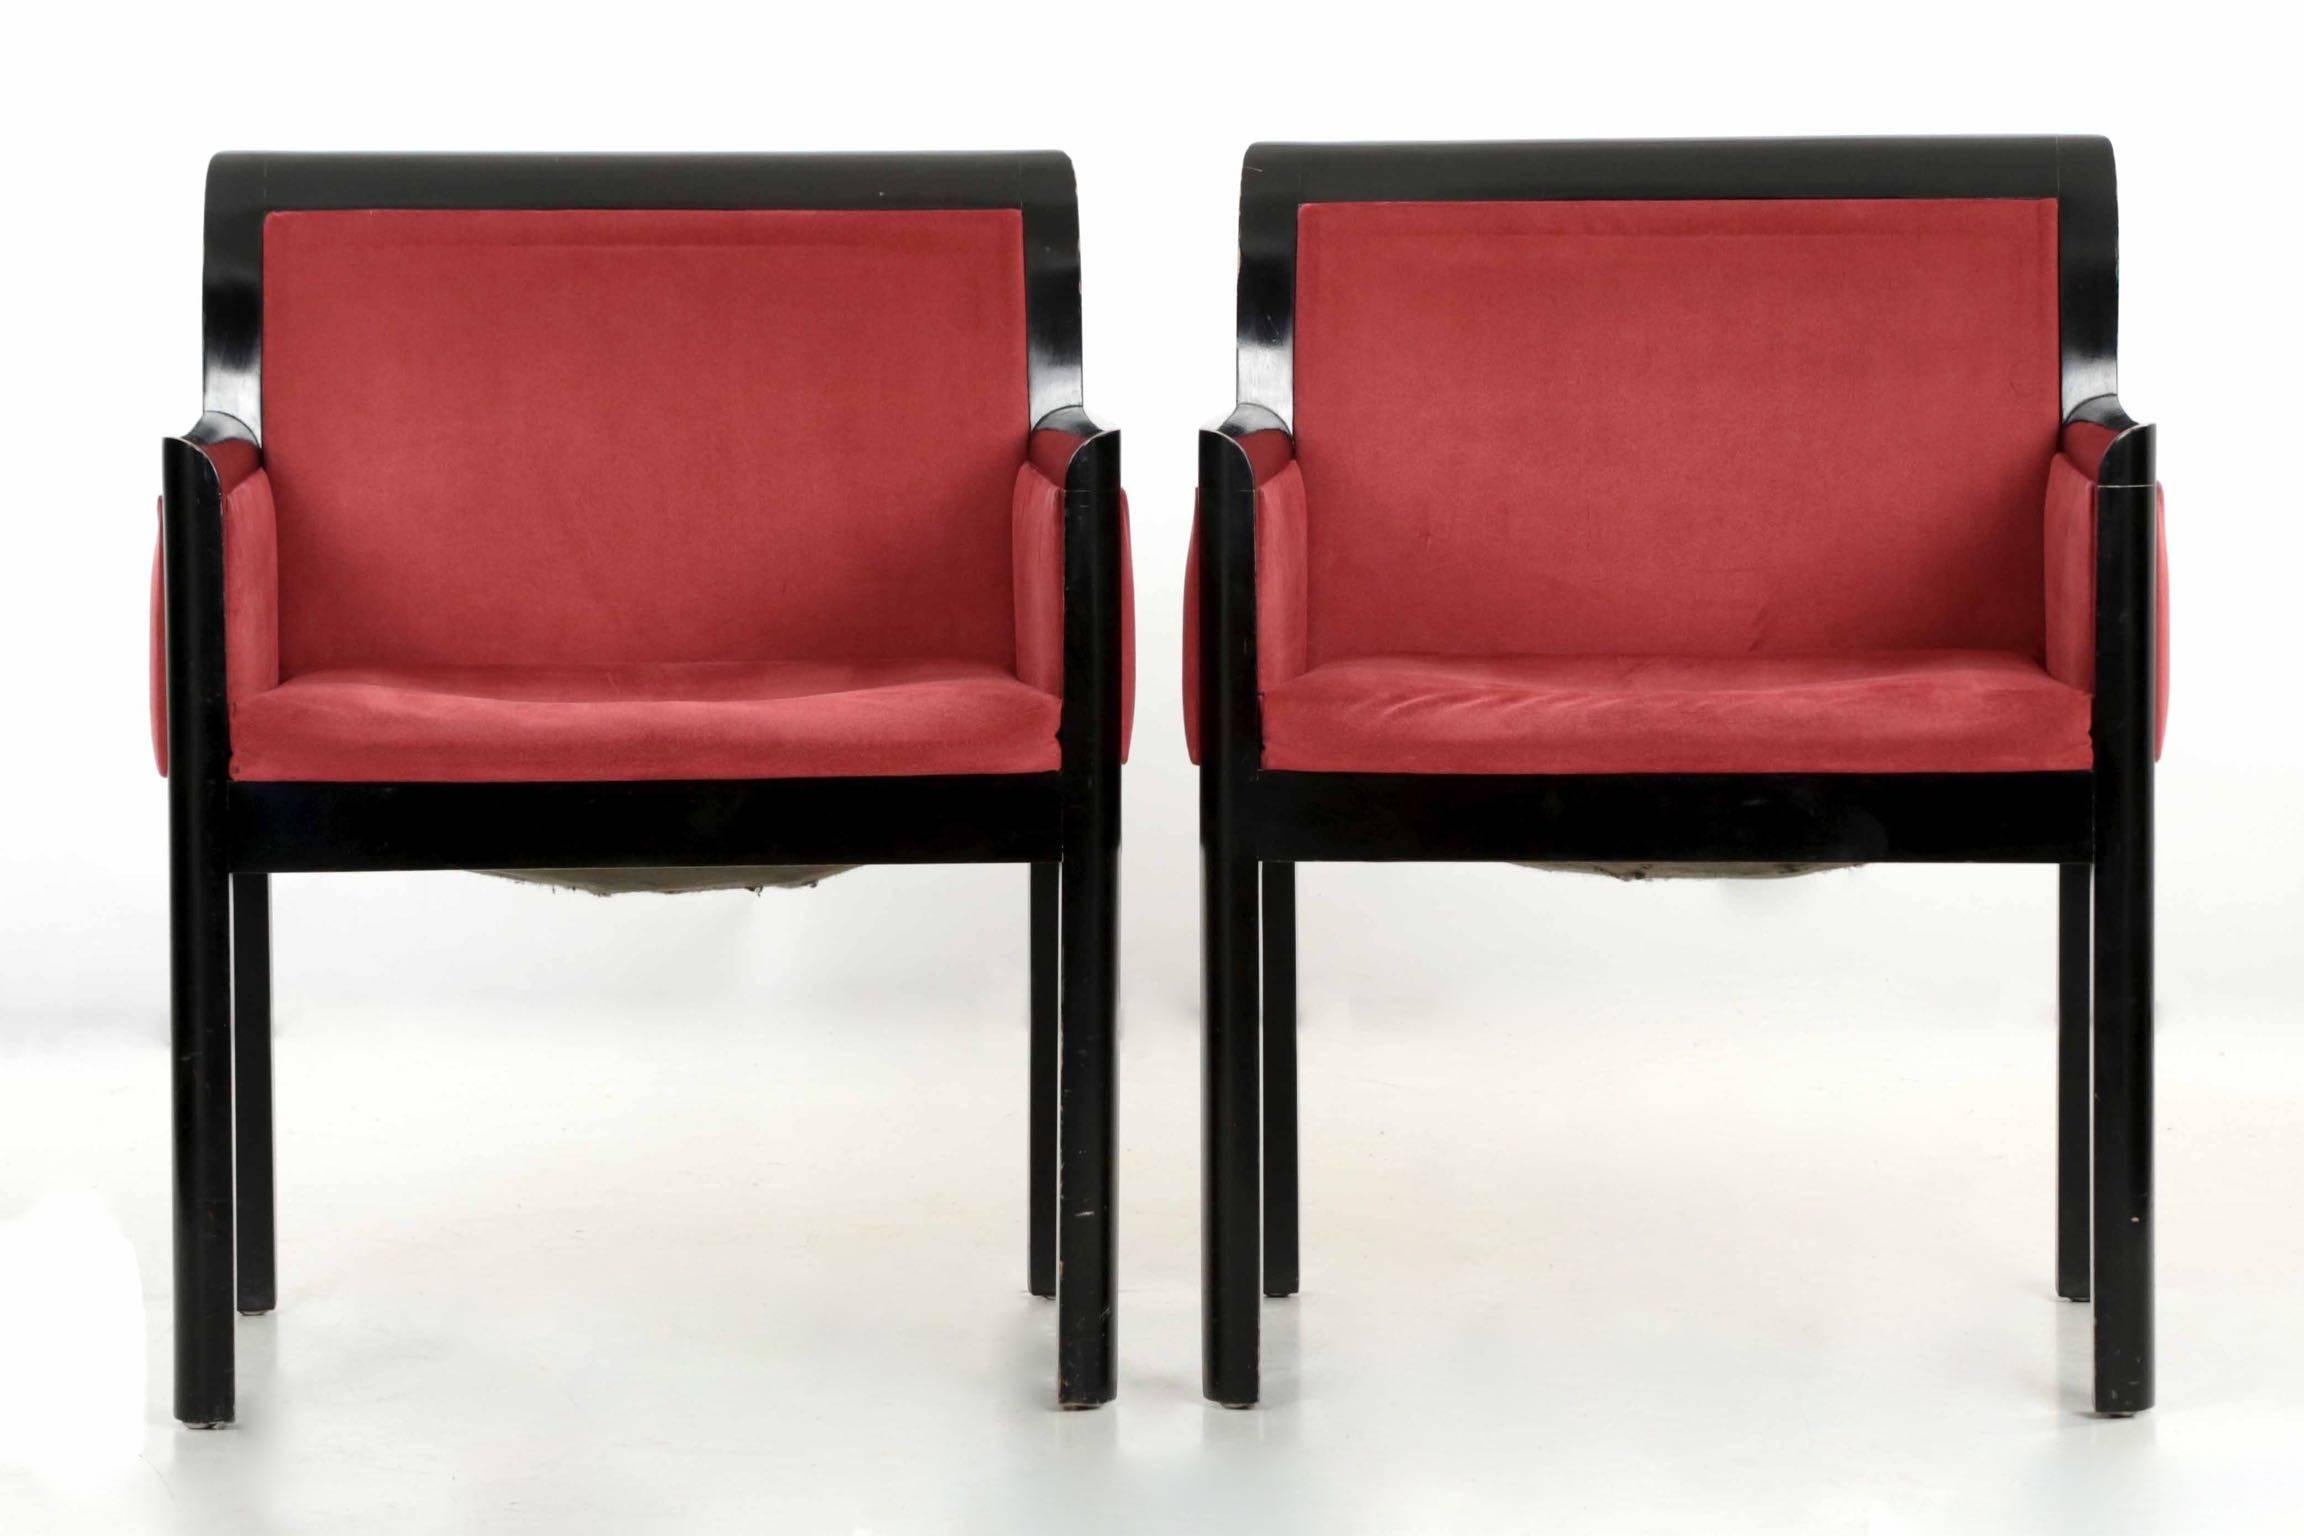 These very attractive contemporary armchairs are beautifully ebonized over what appears to be a maple hardwood, the edges curving outward to create sharp horizontal lines throughout the squared frame. They are upholstered in a maroon micro-suede